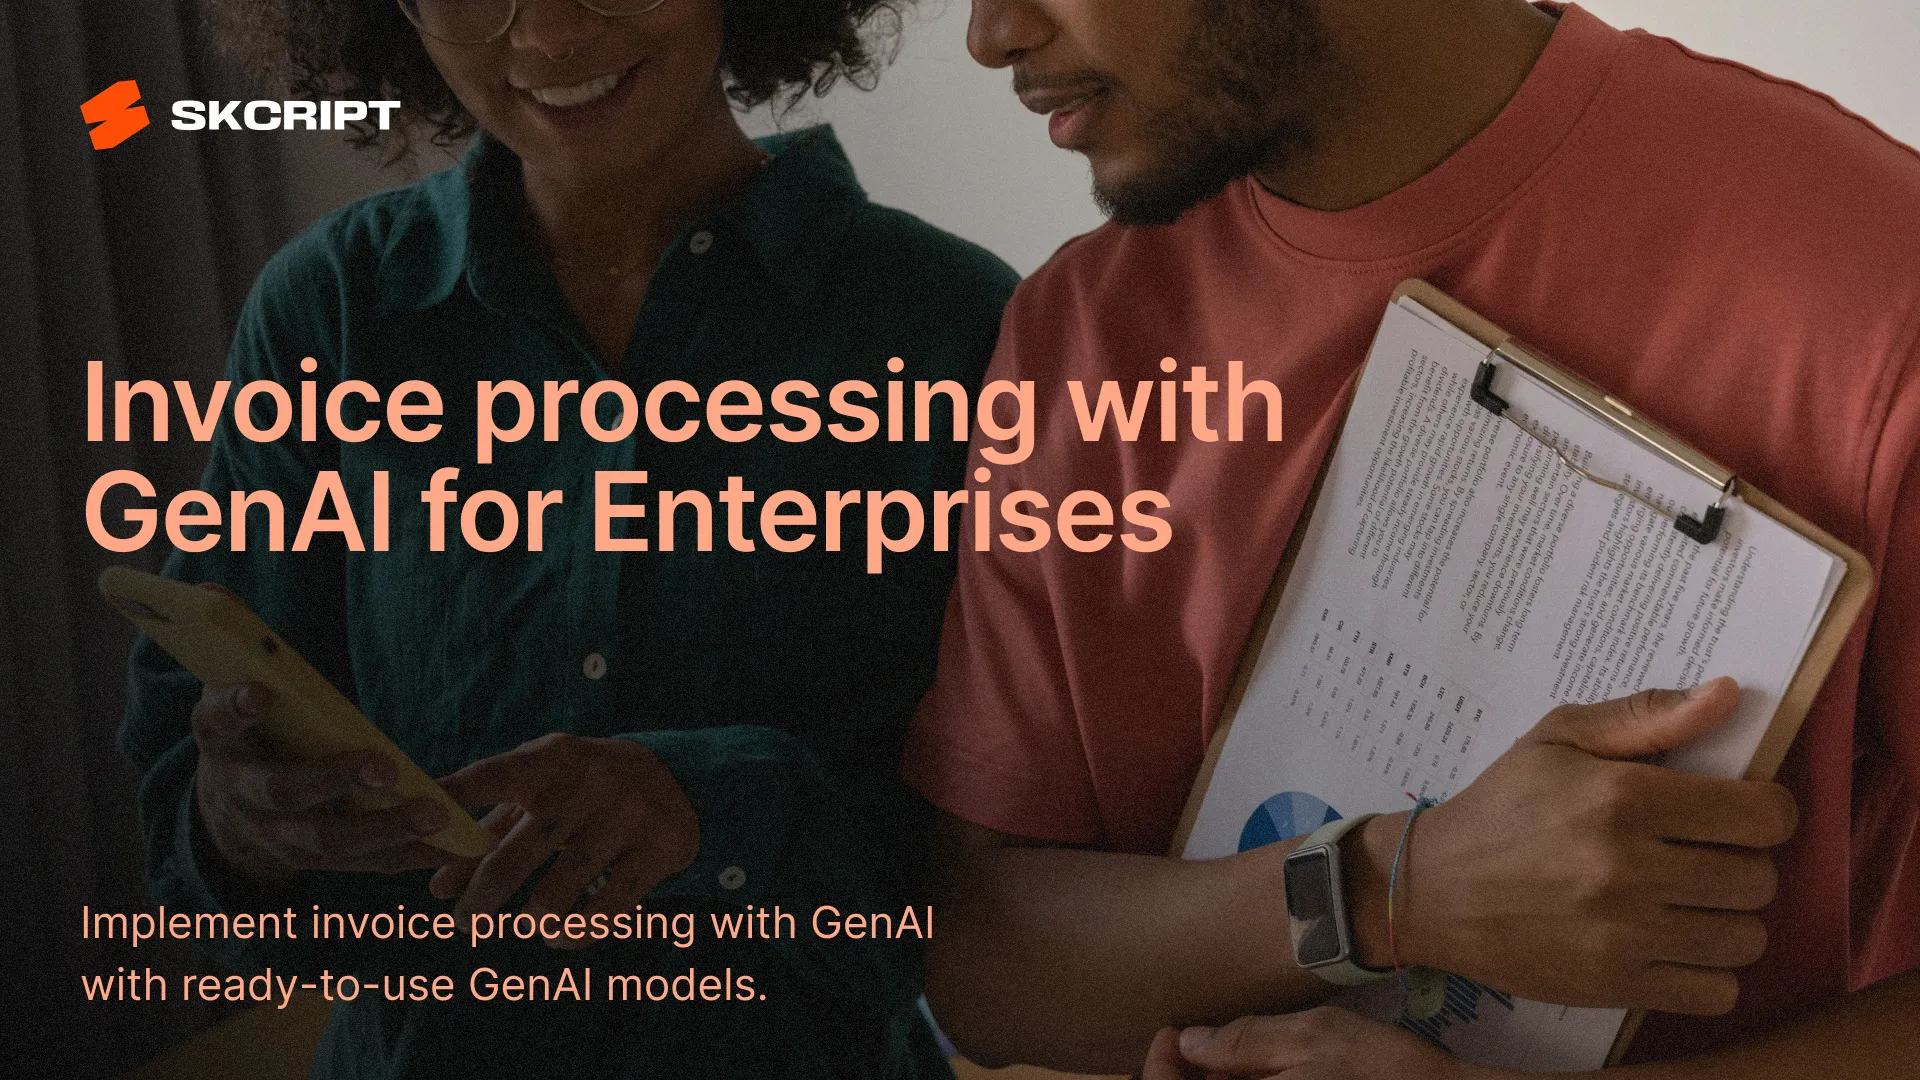 Deploy GenAI to automate tax invoices processing at enterprise scale